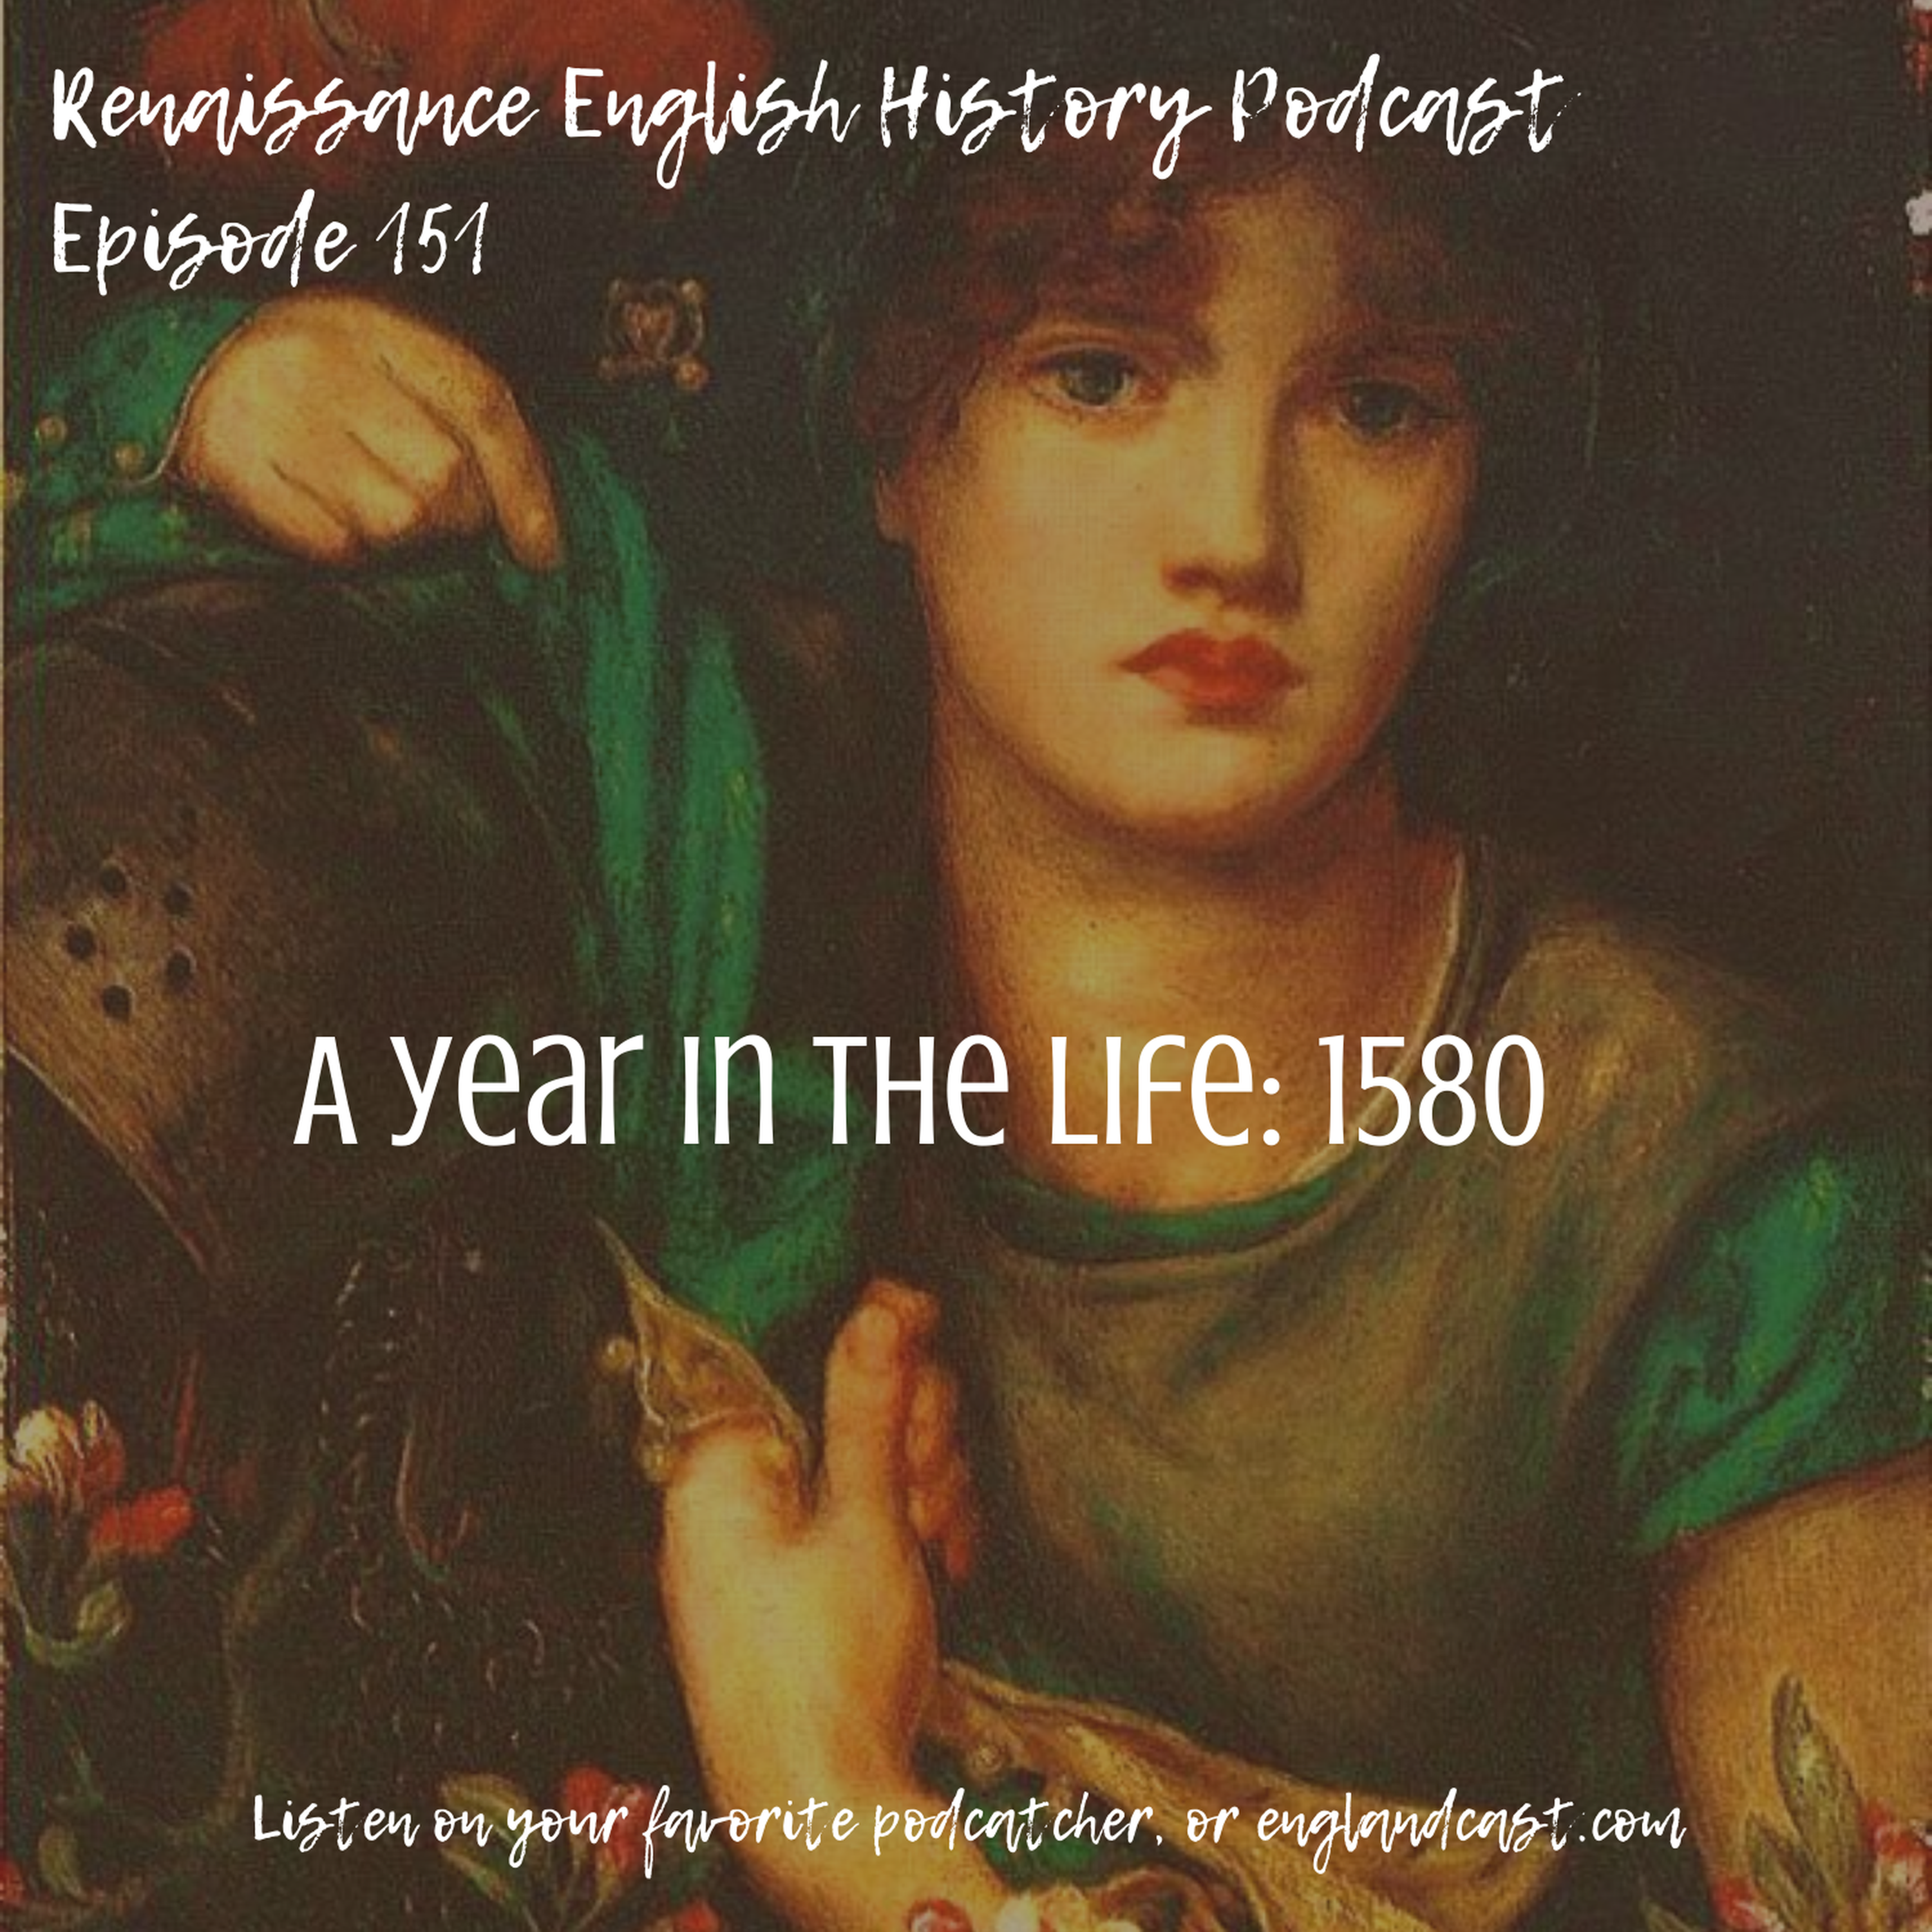 Episode 151: A Year in the Life - 1580